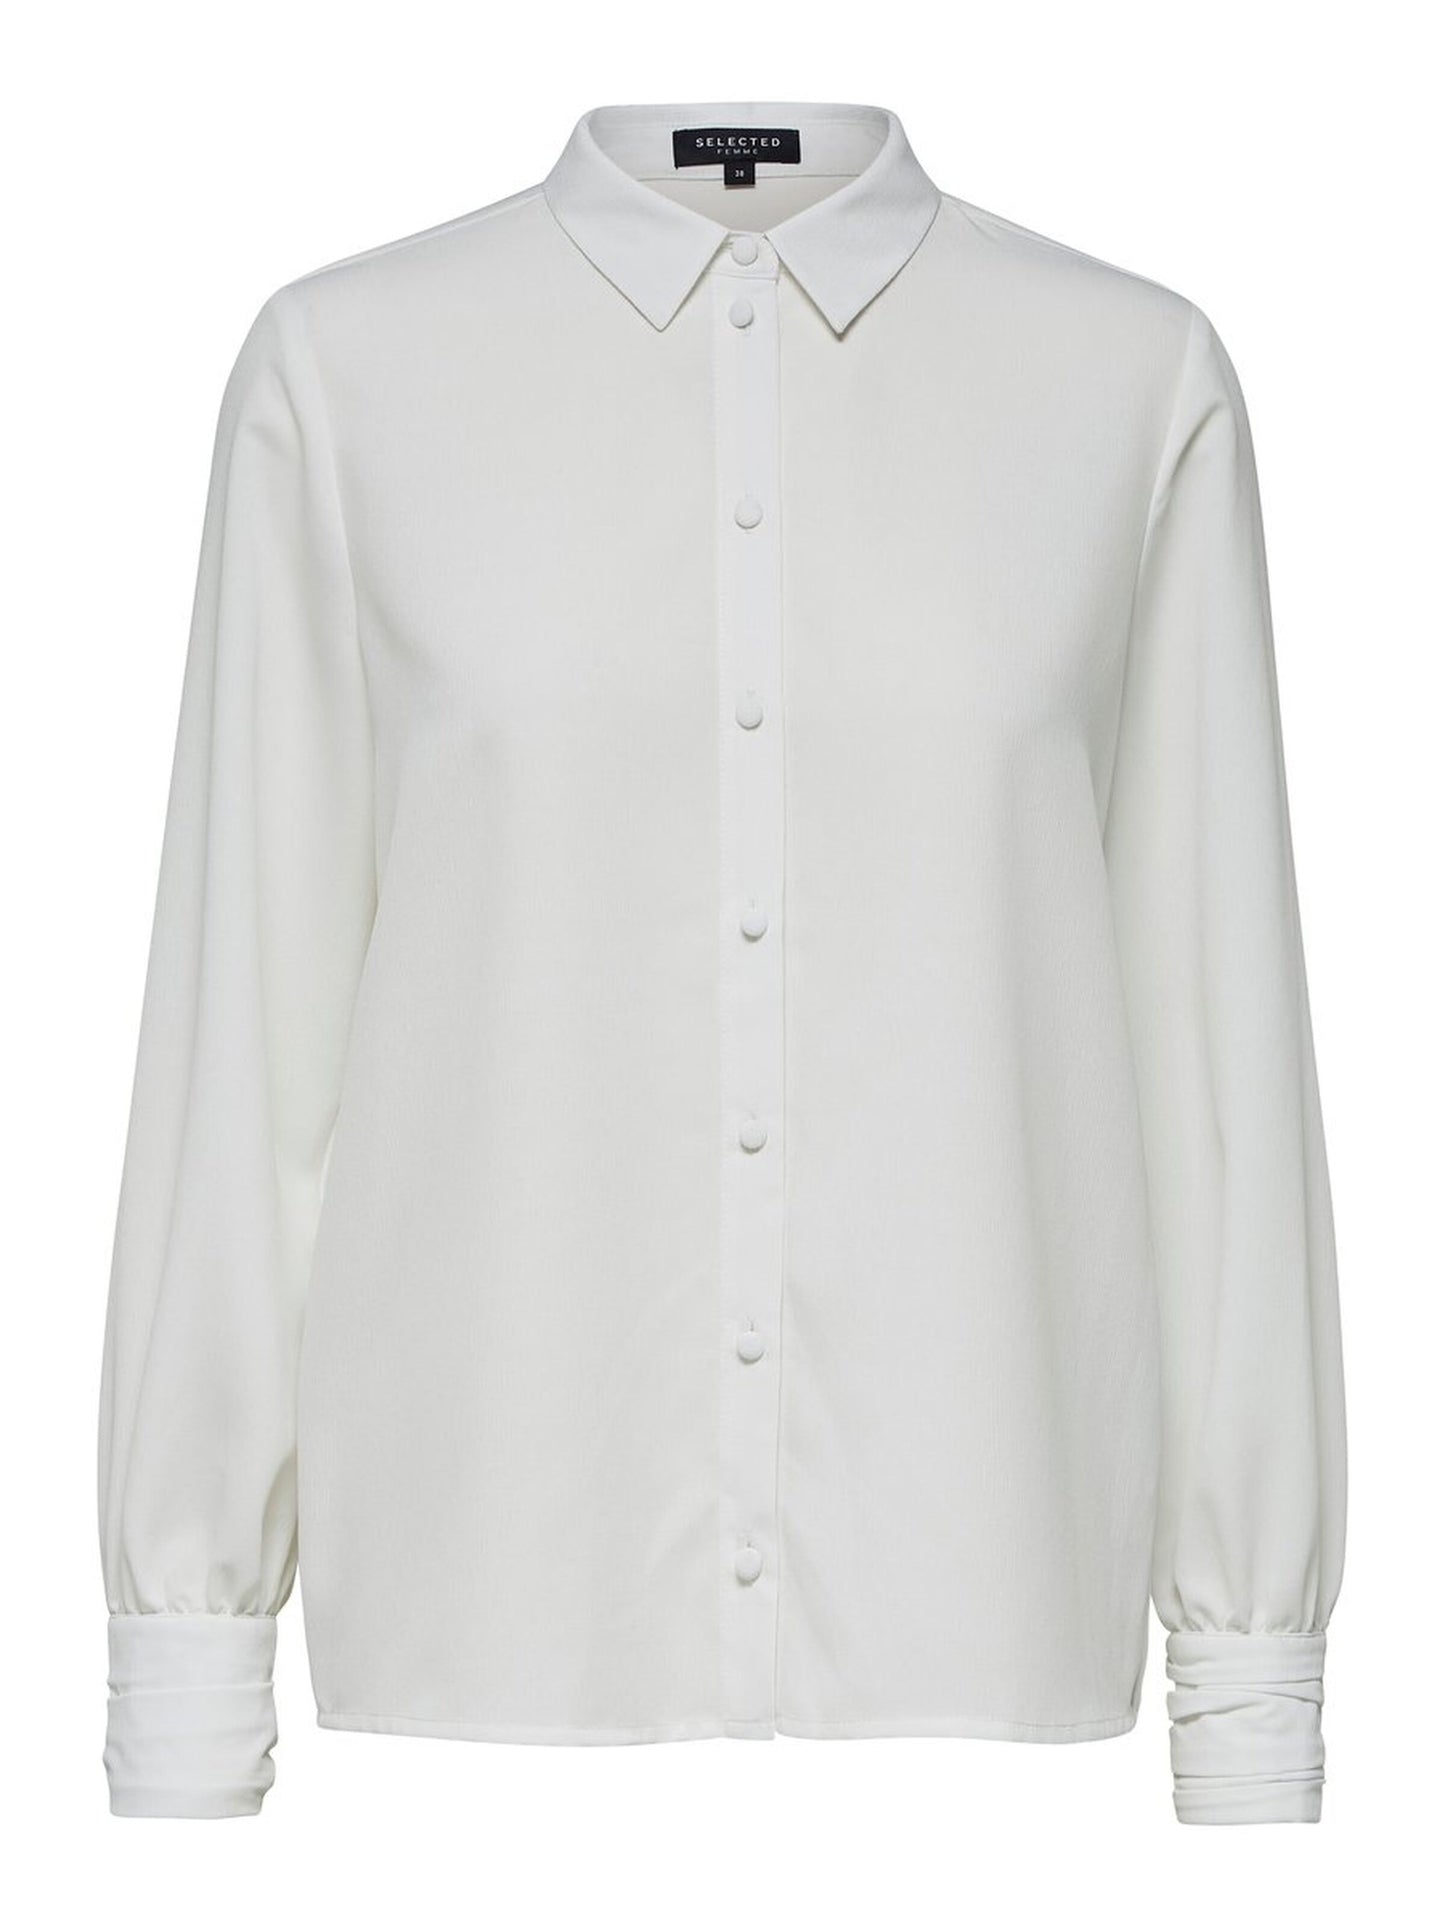 shirt with cuff detail